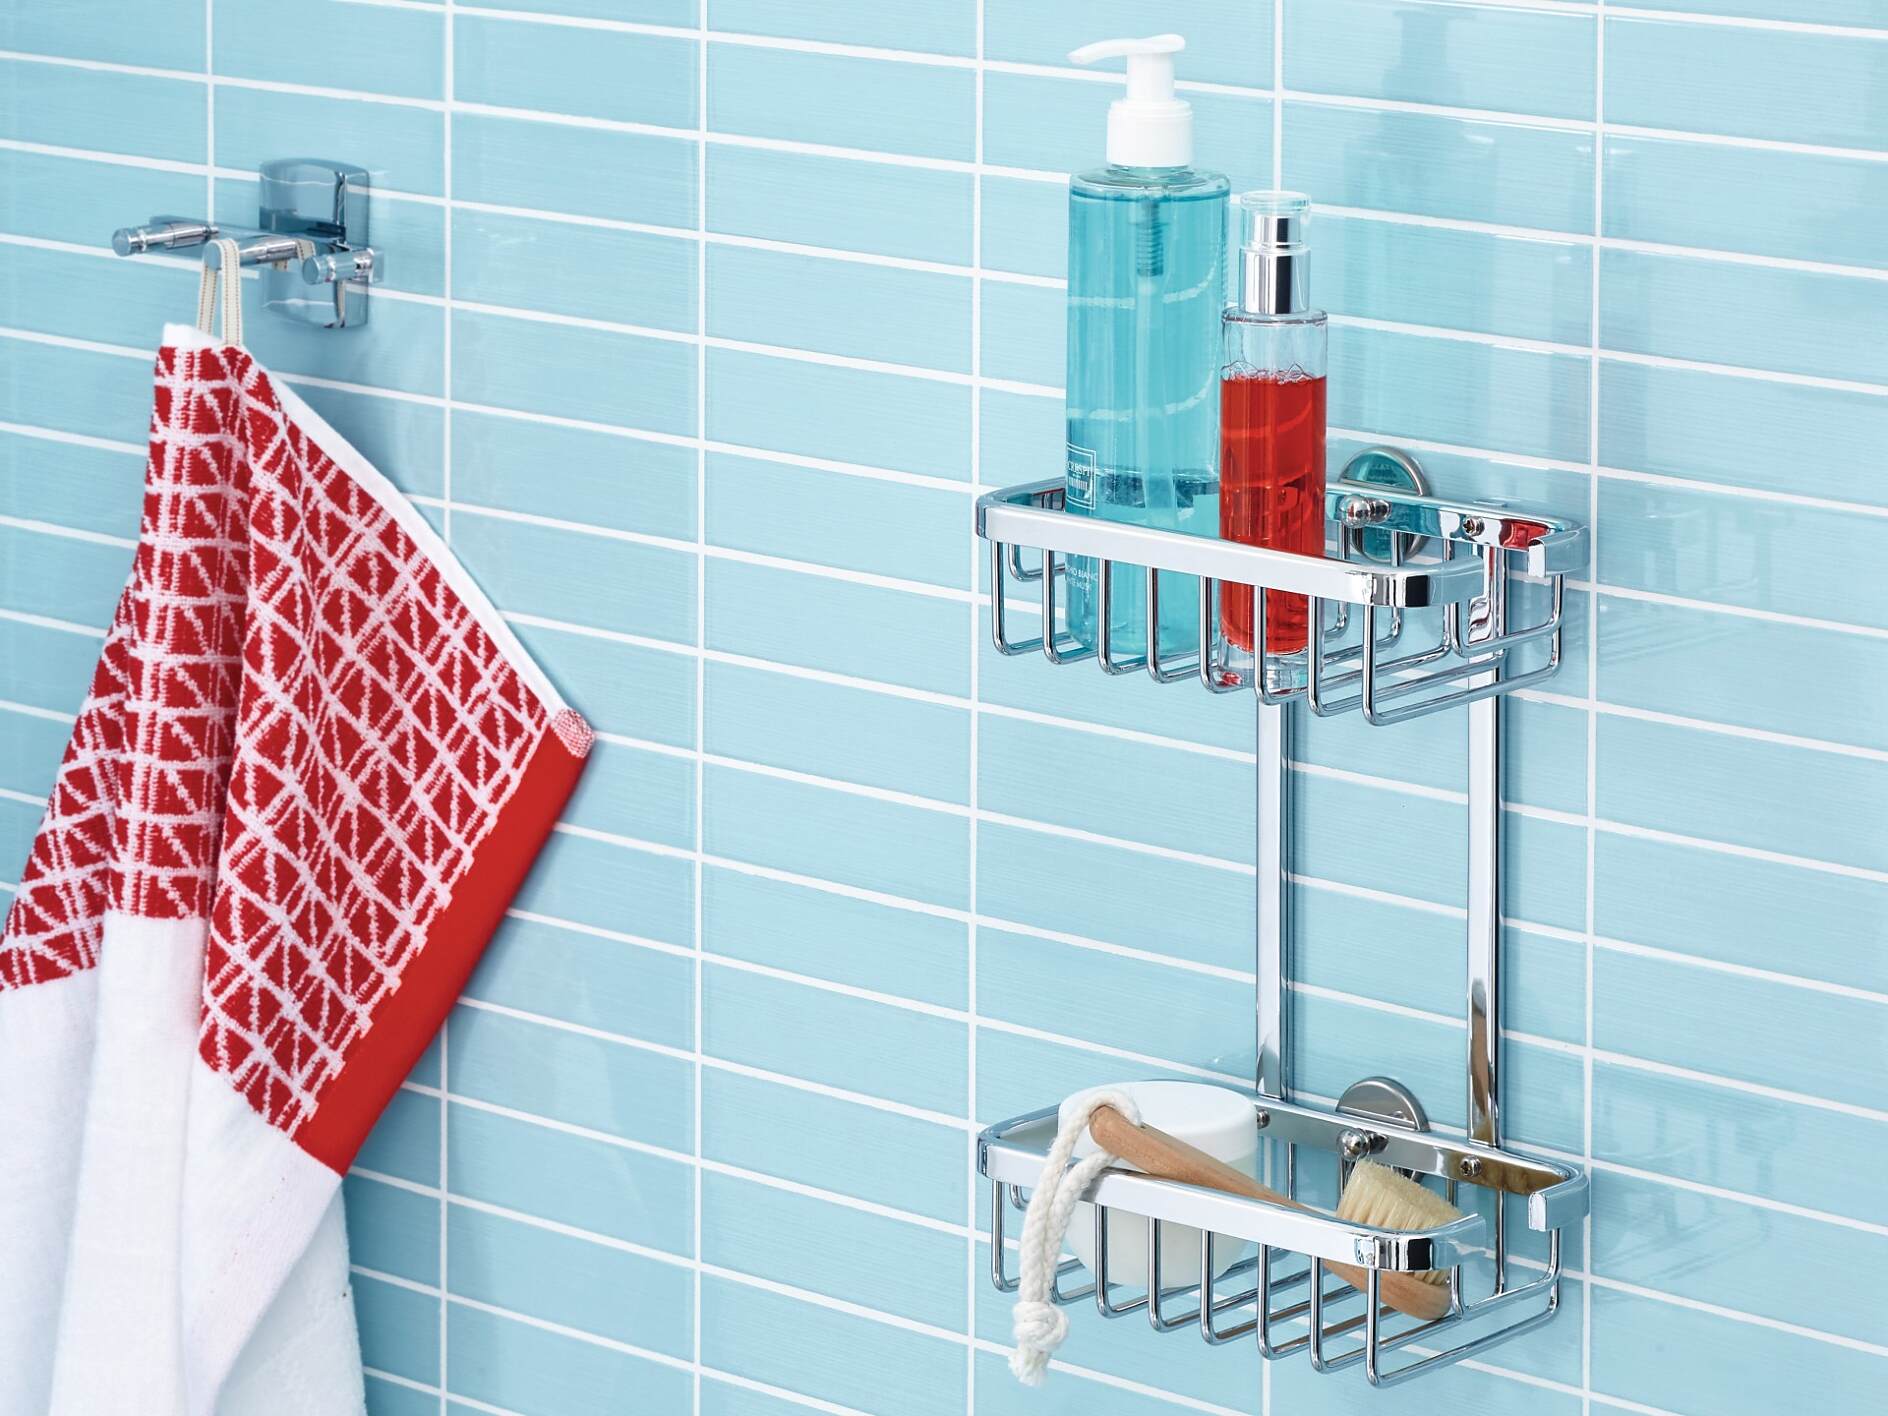 Shower Caddy with Towel Bar Adhesive Mount High Capacity